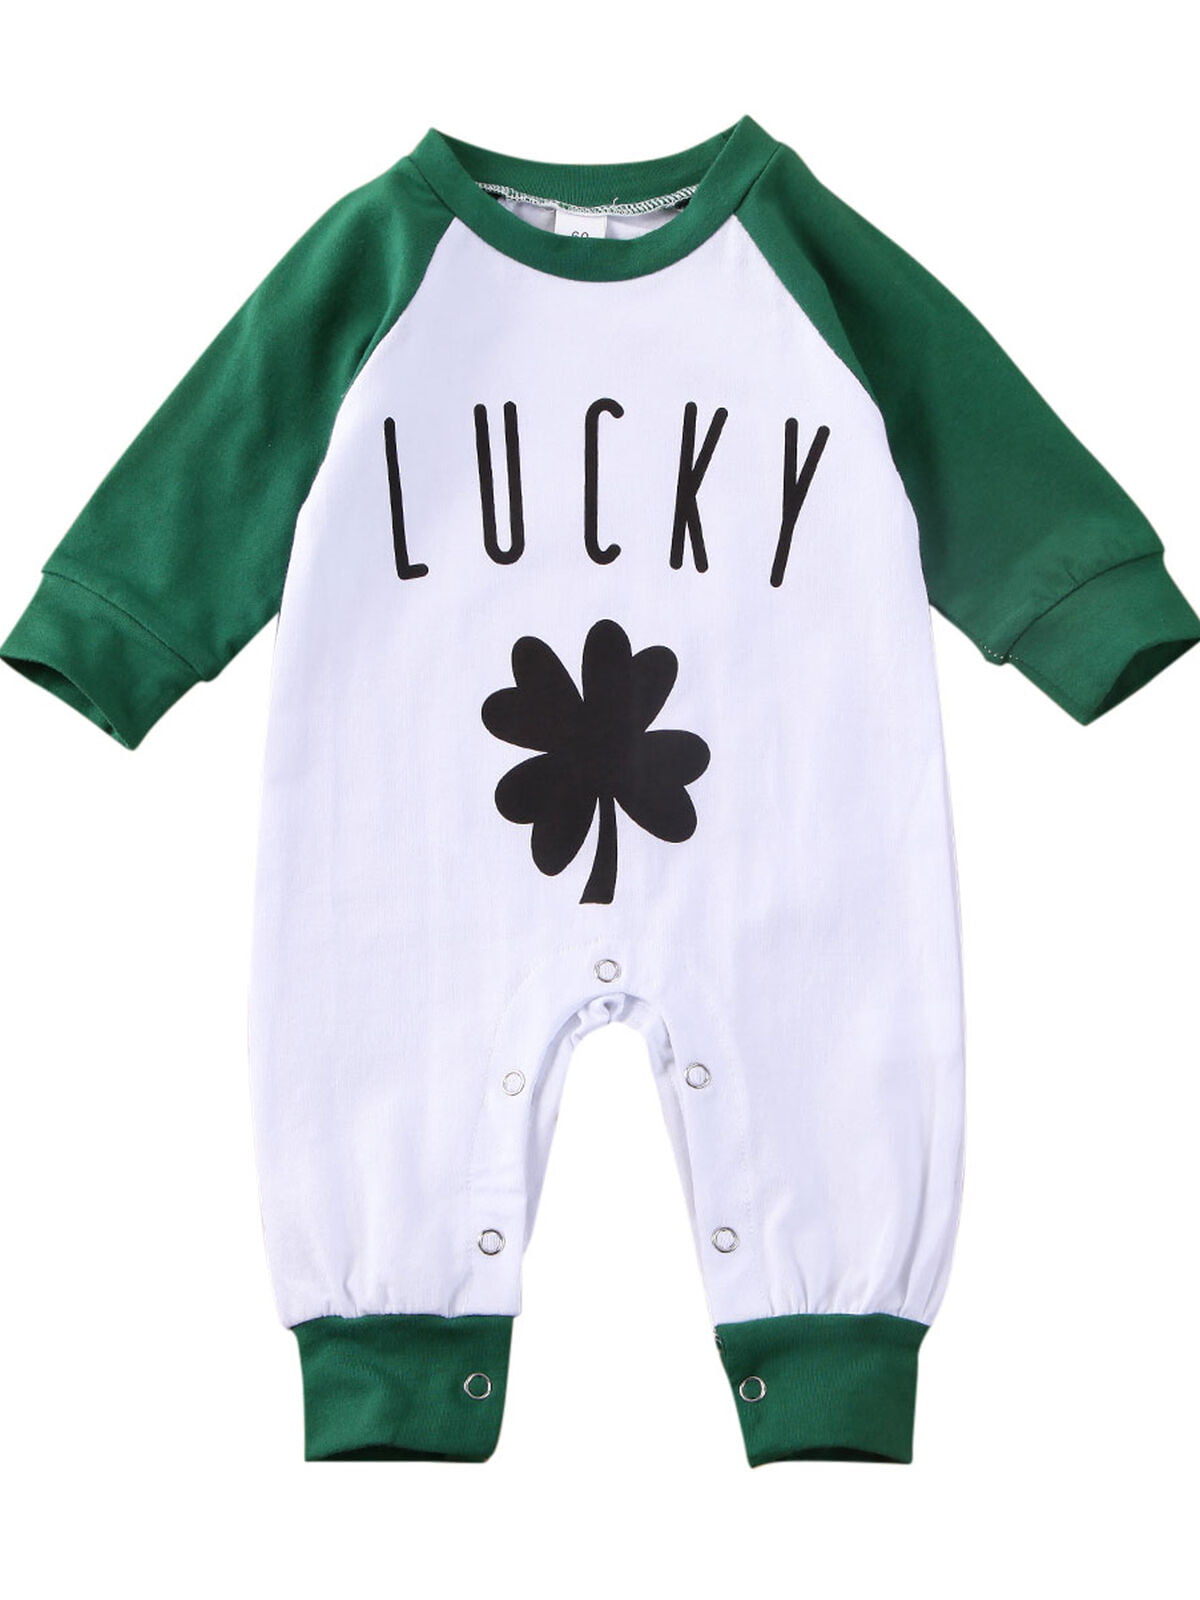 onesie design to a coverall UPGRADE any infant or toddler